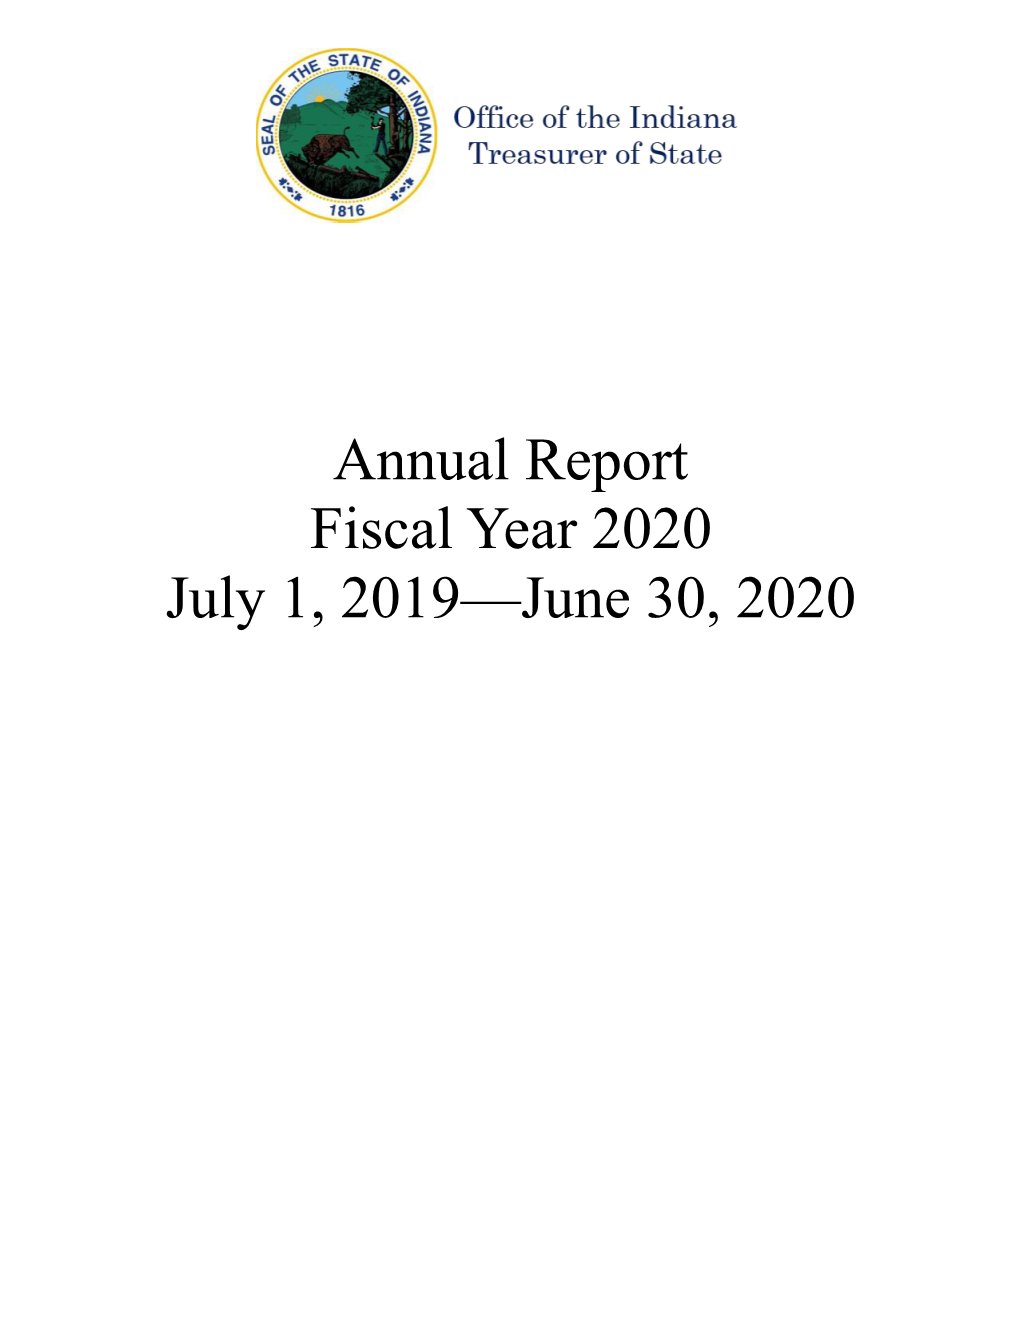 Annual Report Fiscal Year 2020 July 1, 2019—June 30, 2020